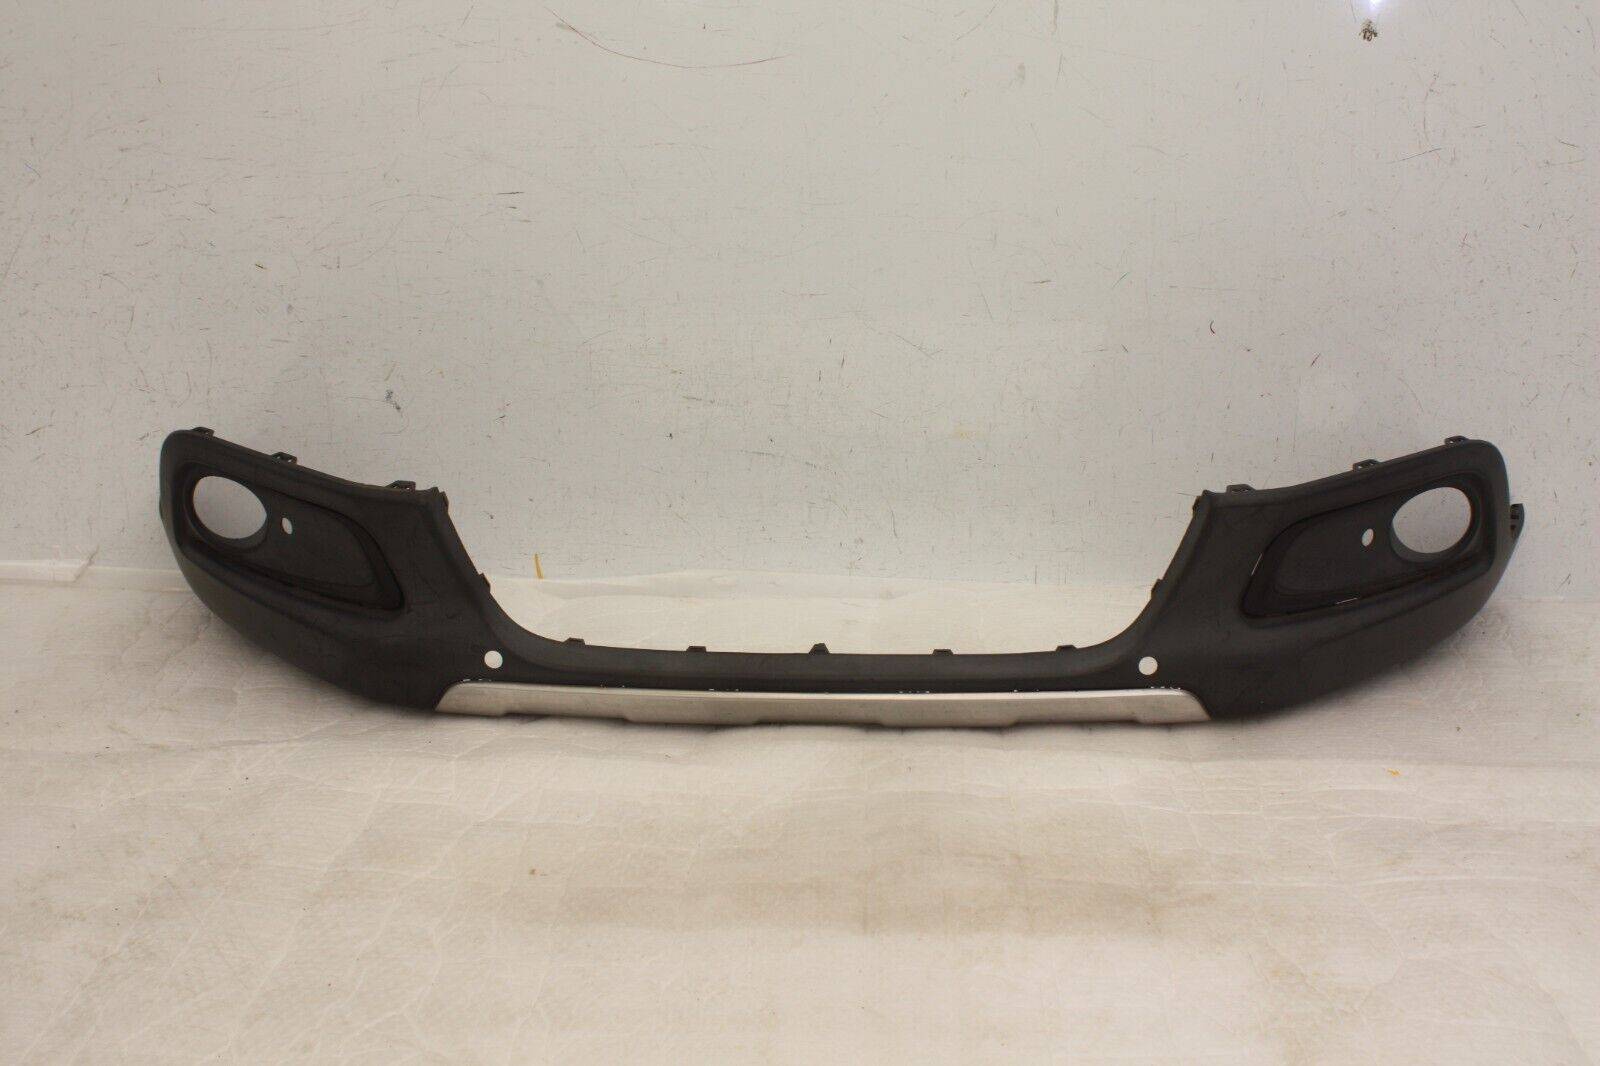 Peugeot 2008 Front Bumper Lower Section 2013 TO 2016 9802520577 Genuine 176338607690